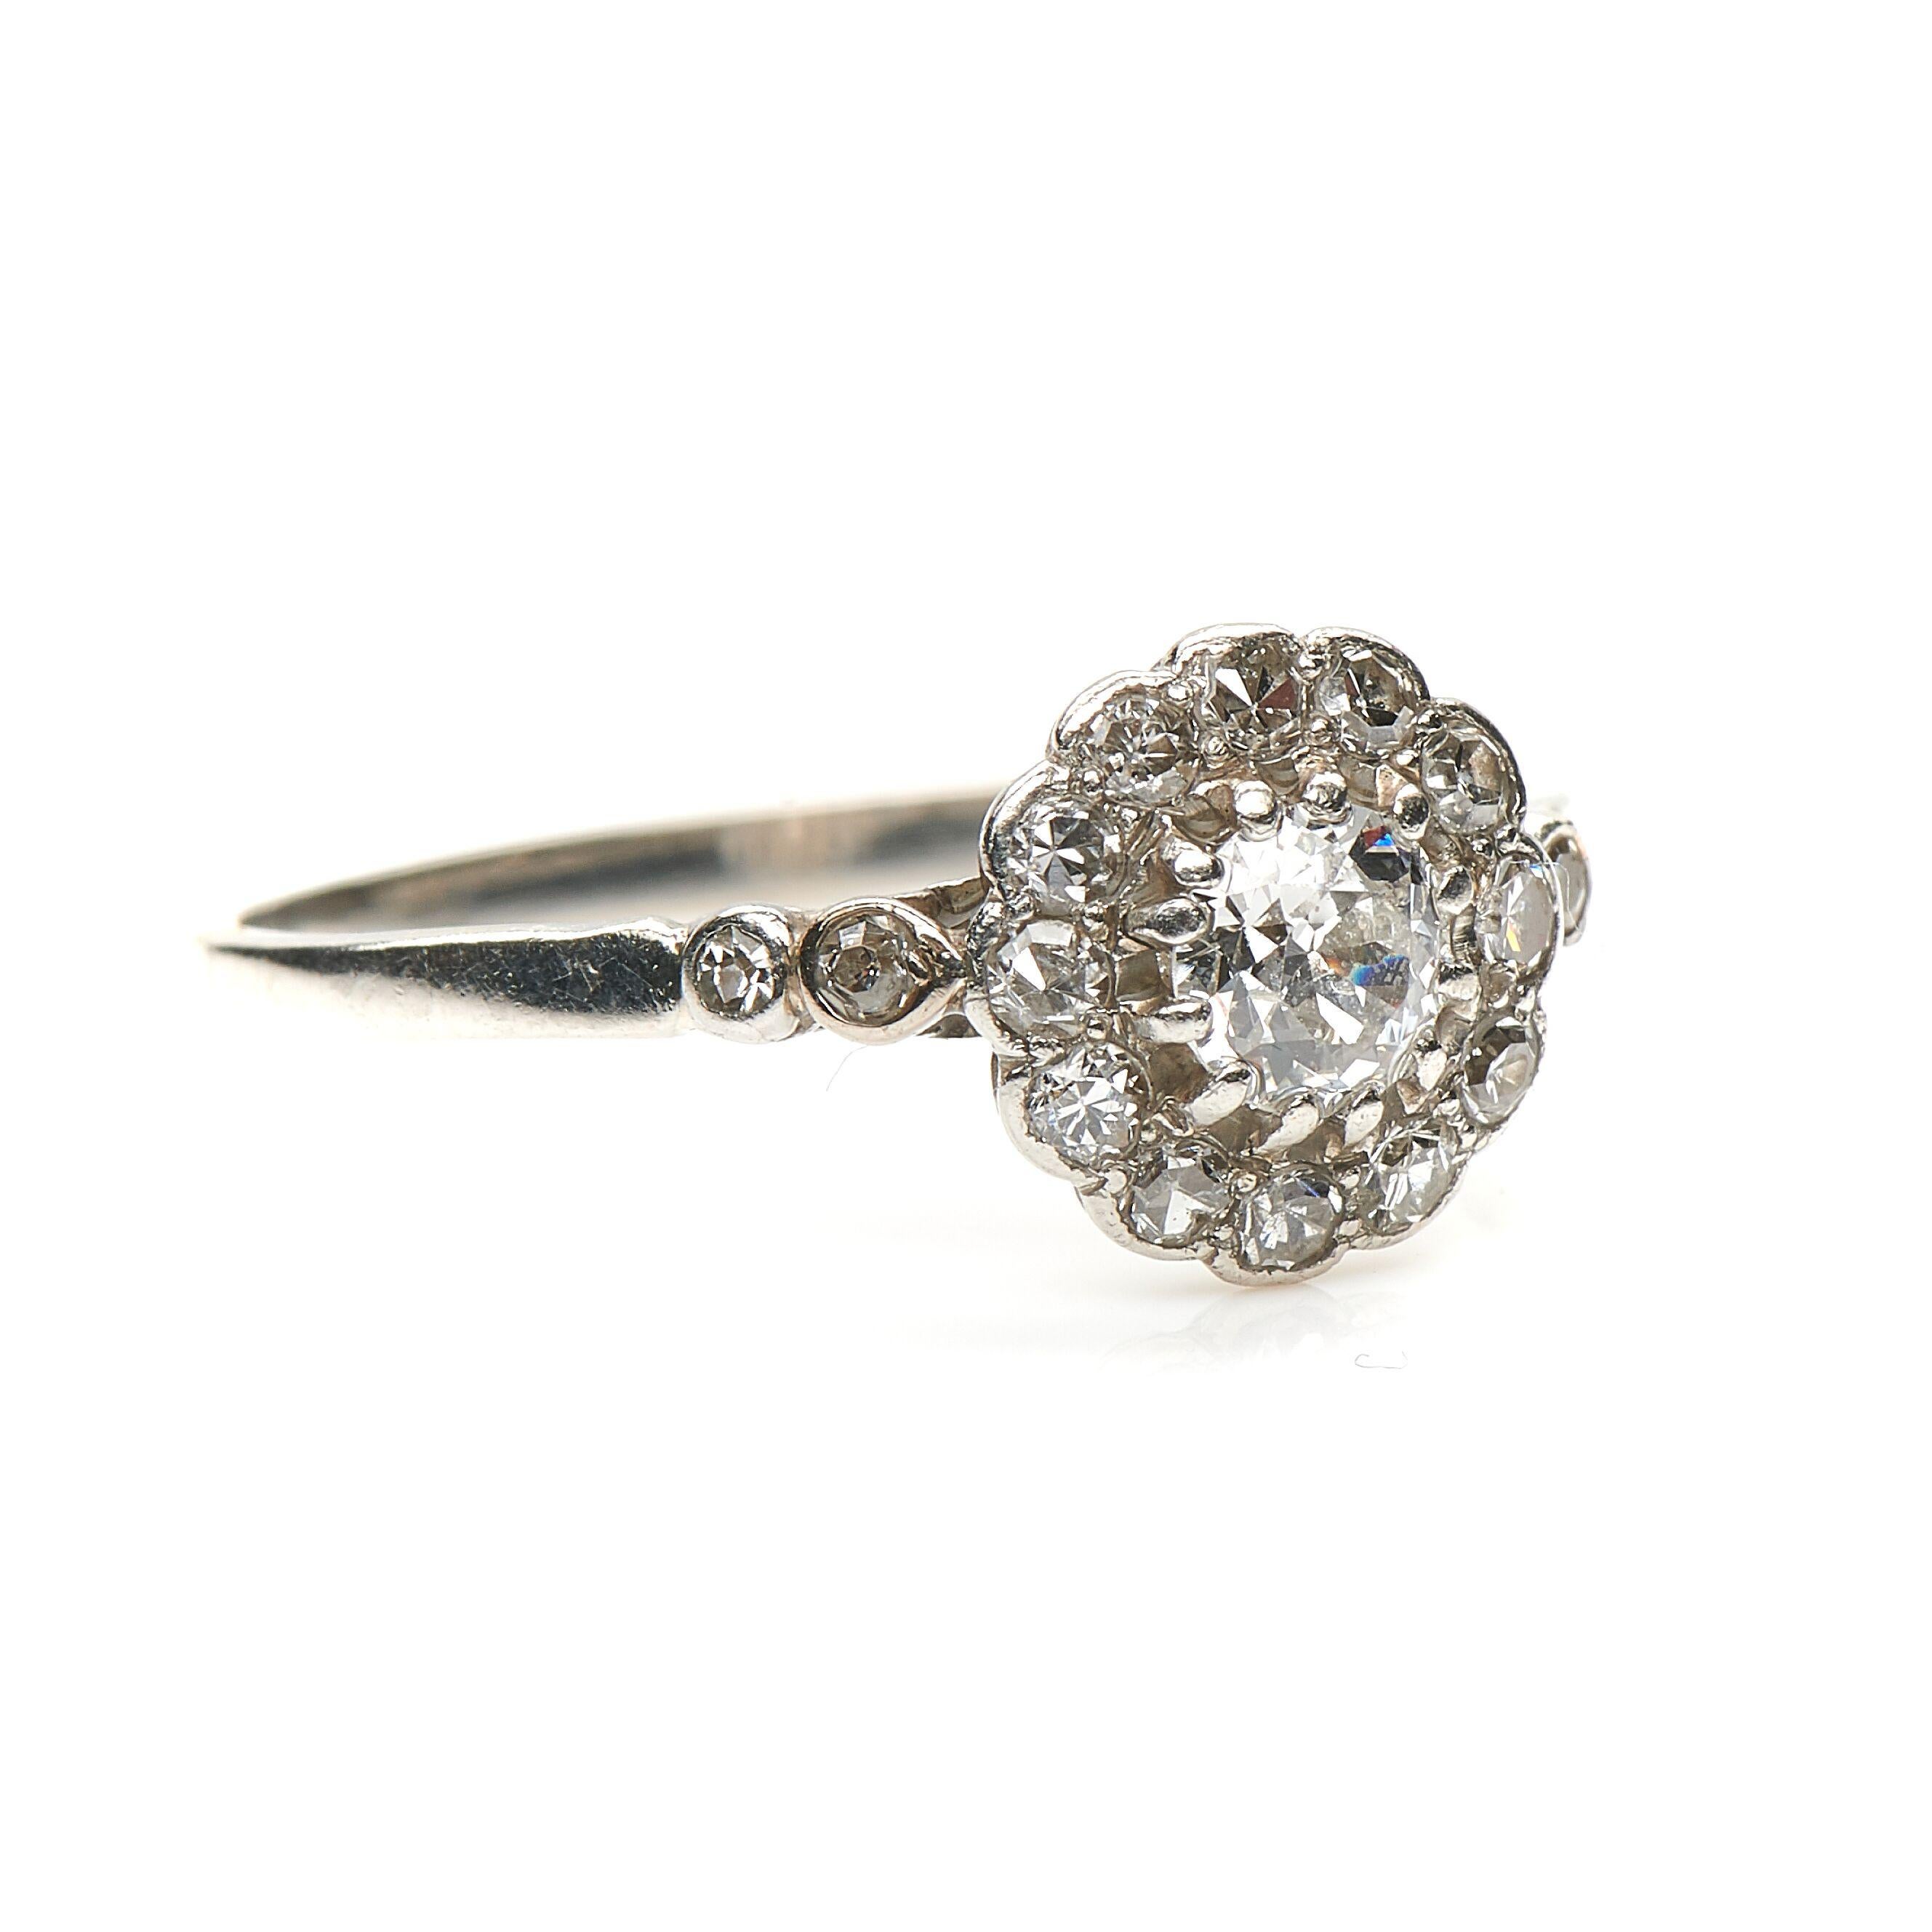 Antique, diamond engagement ring, circa 1910. Set to centre a round old cut diamond in a open-backed claw setting framed by a boarder of delicate smaller diamonds all rubover set in platinum. Further diamonds descend the shoulders to enhance the